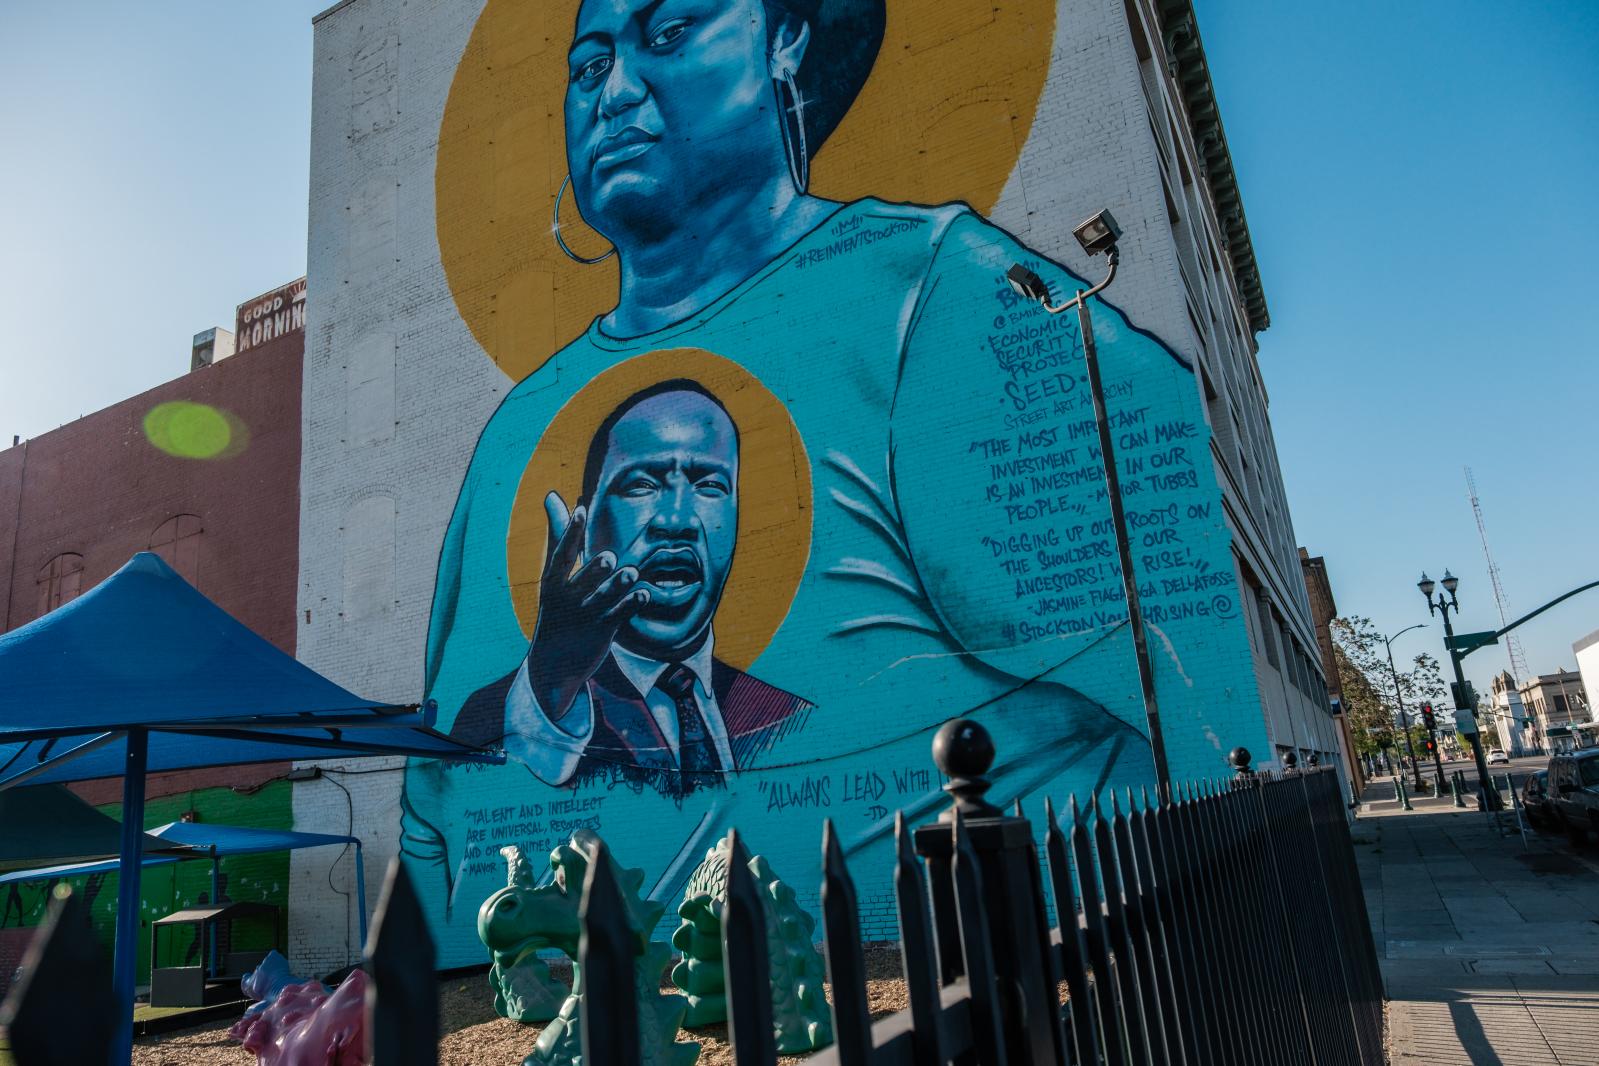 Image from Universal Basic Income: Trying to save a city - STOCKTON, CA - APRIL 5: A mural by Brandan Odums shows...